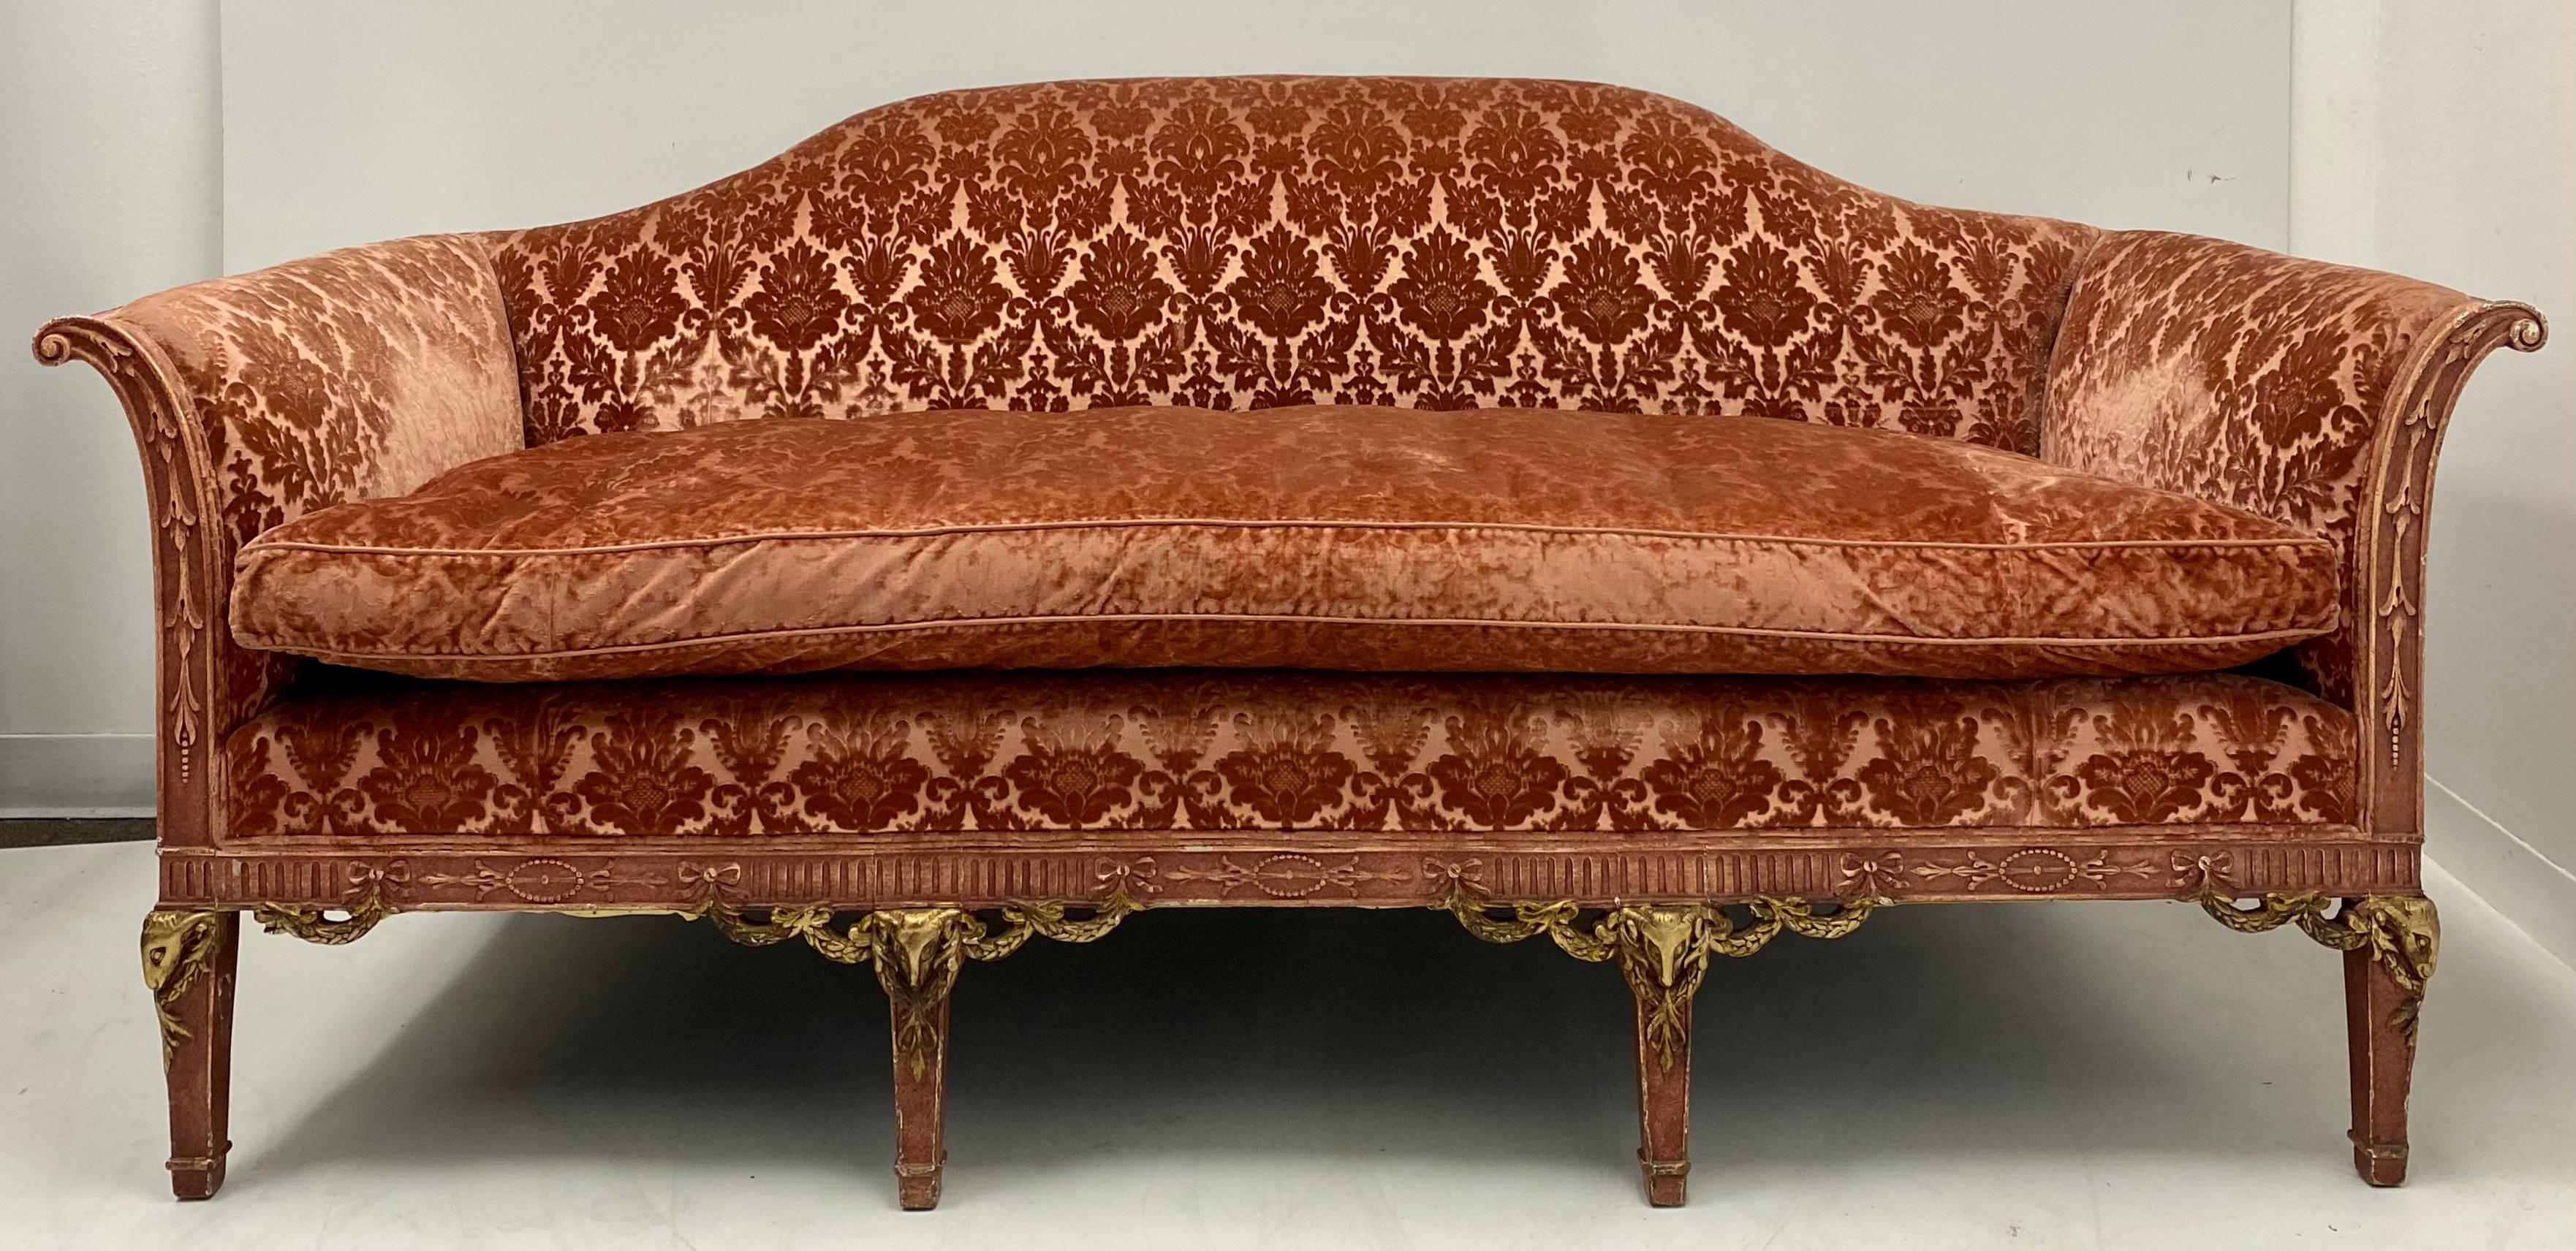 Early 20th Century French Neoclassical Style Pink Velvet Sofa / Canapé 2